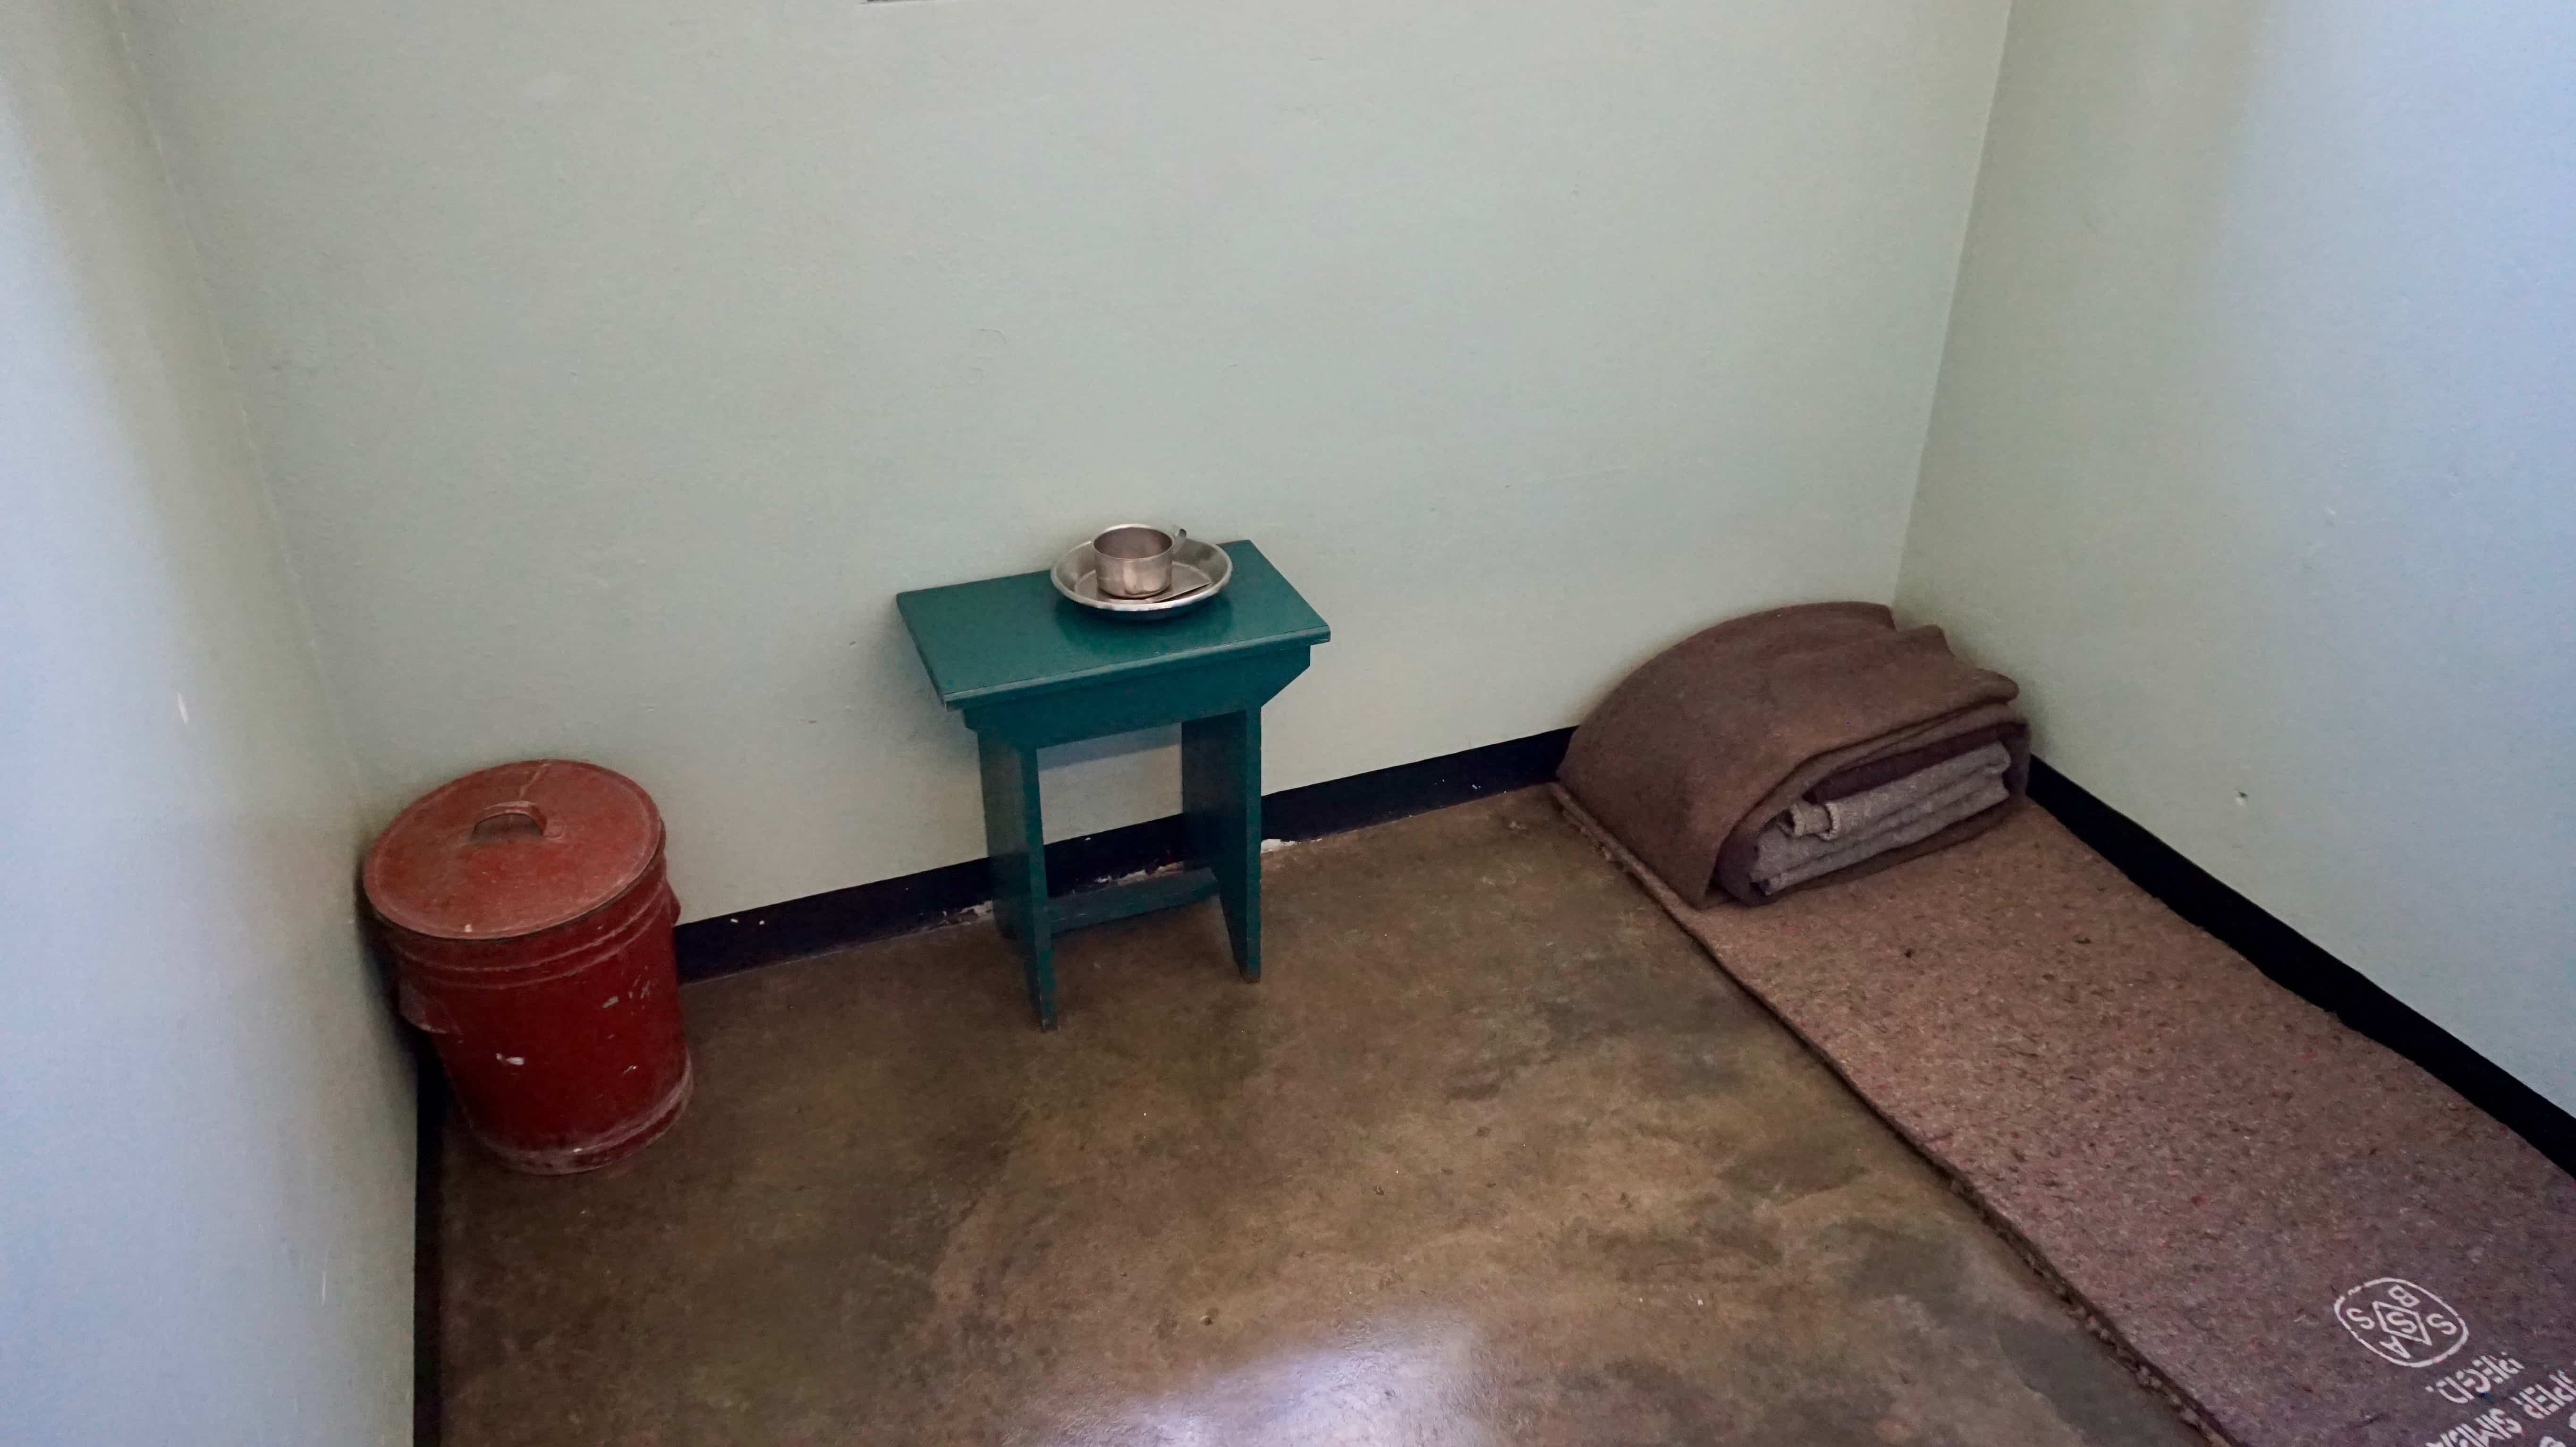 Nelson Mandela's cell at Robben Island prison, South Africa